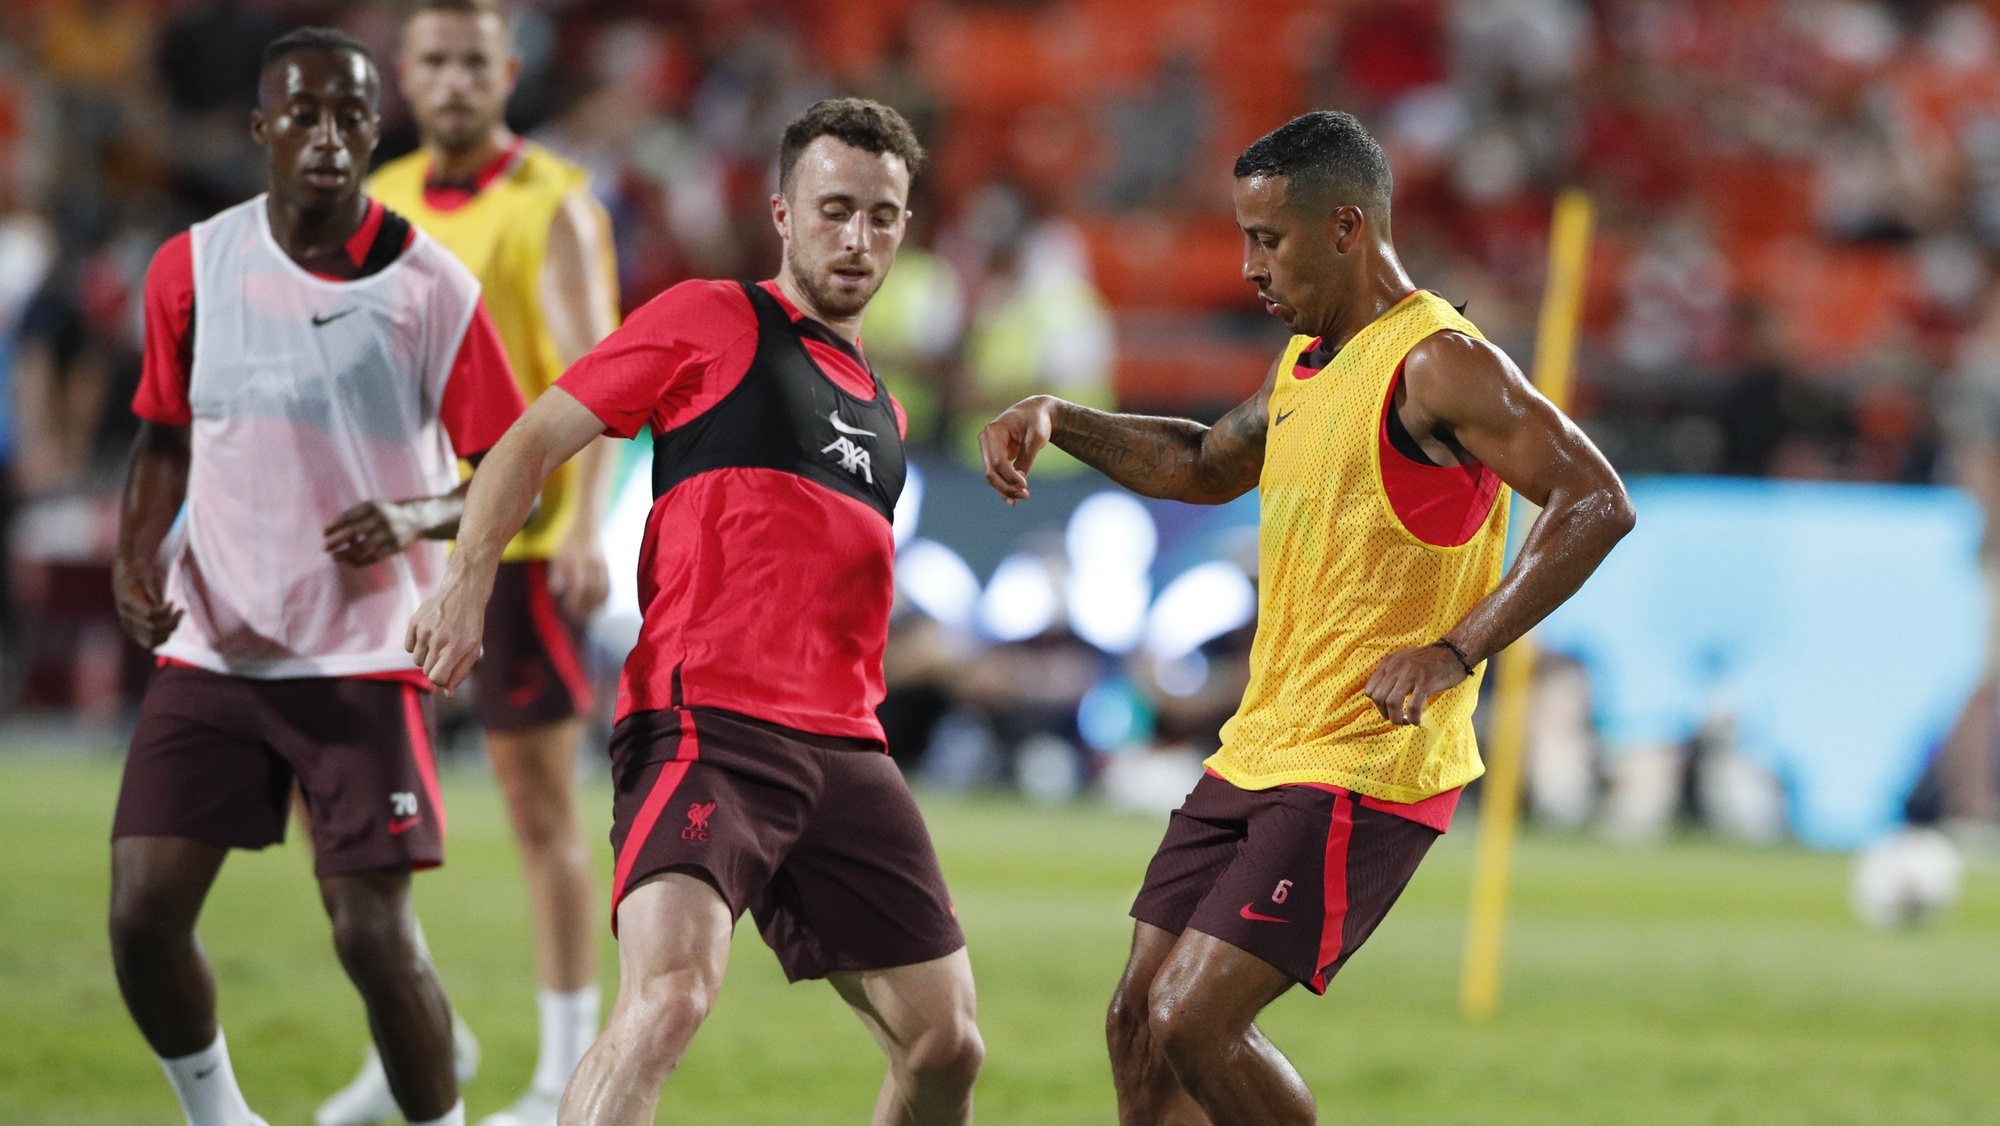 epa10065303 Liverpool players Diogo Jota (C) and Thiago Alcantara (R) perform during their team&#039;s training session for the pre-season tour soccer match between Liverpool FC and Manchester United at Rajamangala National Stadium in Bangkok, Thailand, 11 July 2022. Liverpool FC will face Manchester United in their Bangkok Century Cup pre-season tour soccer match on 12 July 2022 in Bangkok.  EPA/RUNGROJ YONGRIT